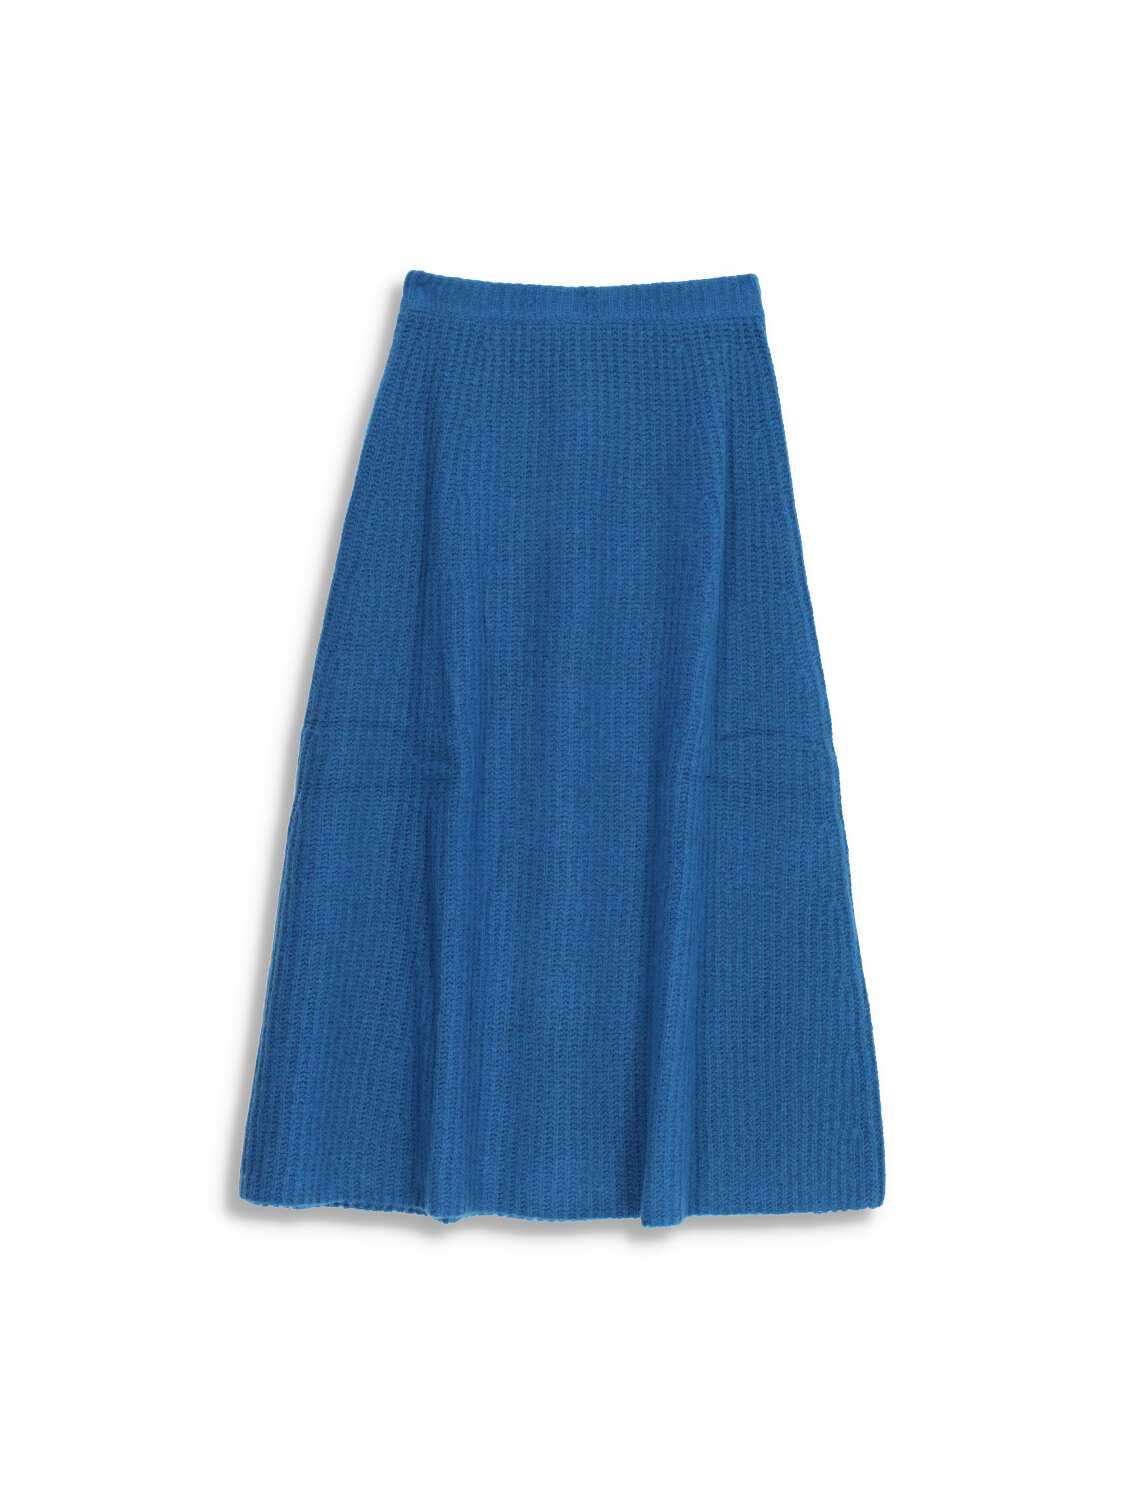 LU Ren Fay - Midi skirt with elastic waistband in cashmere blue XS